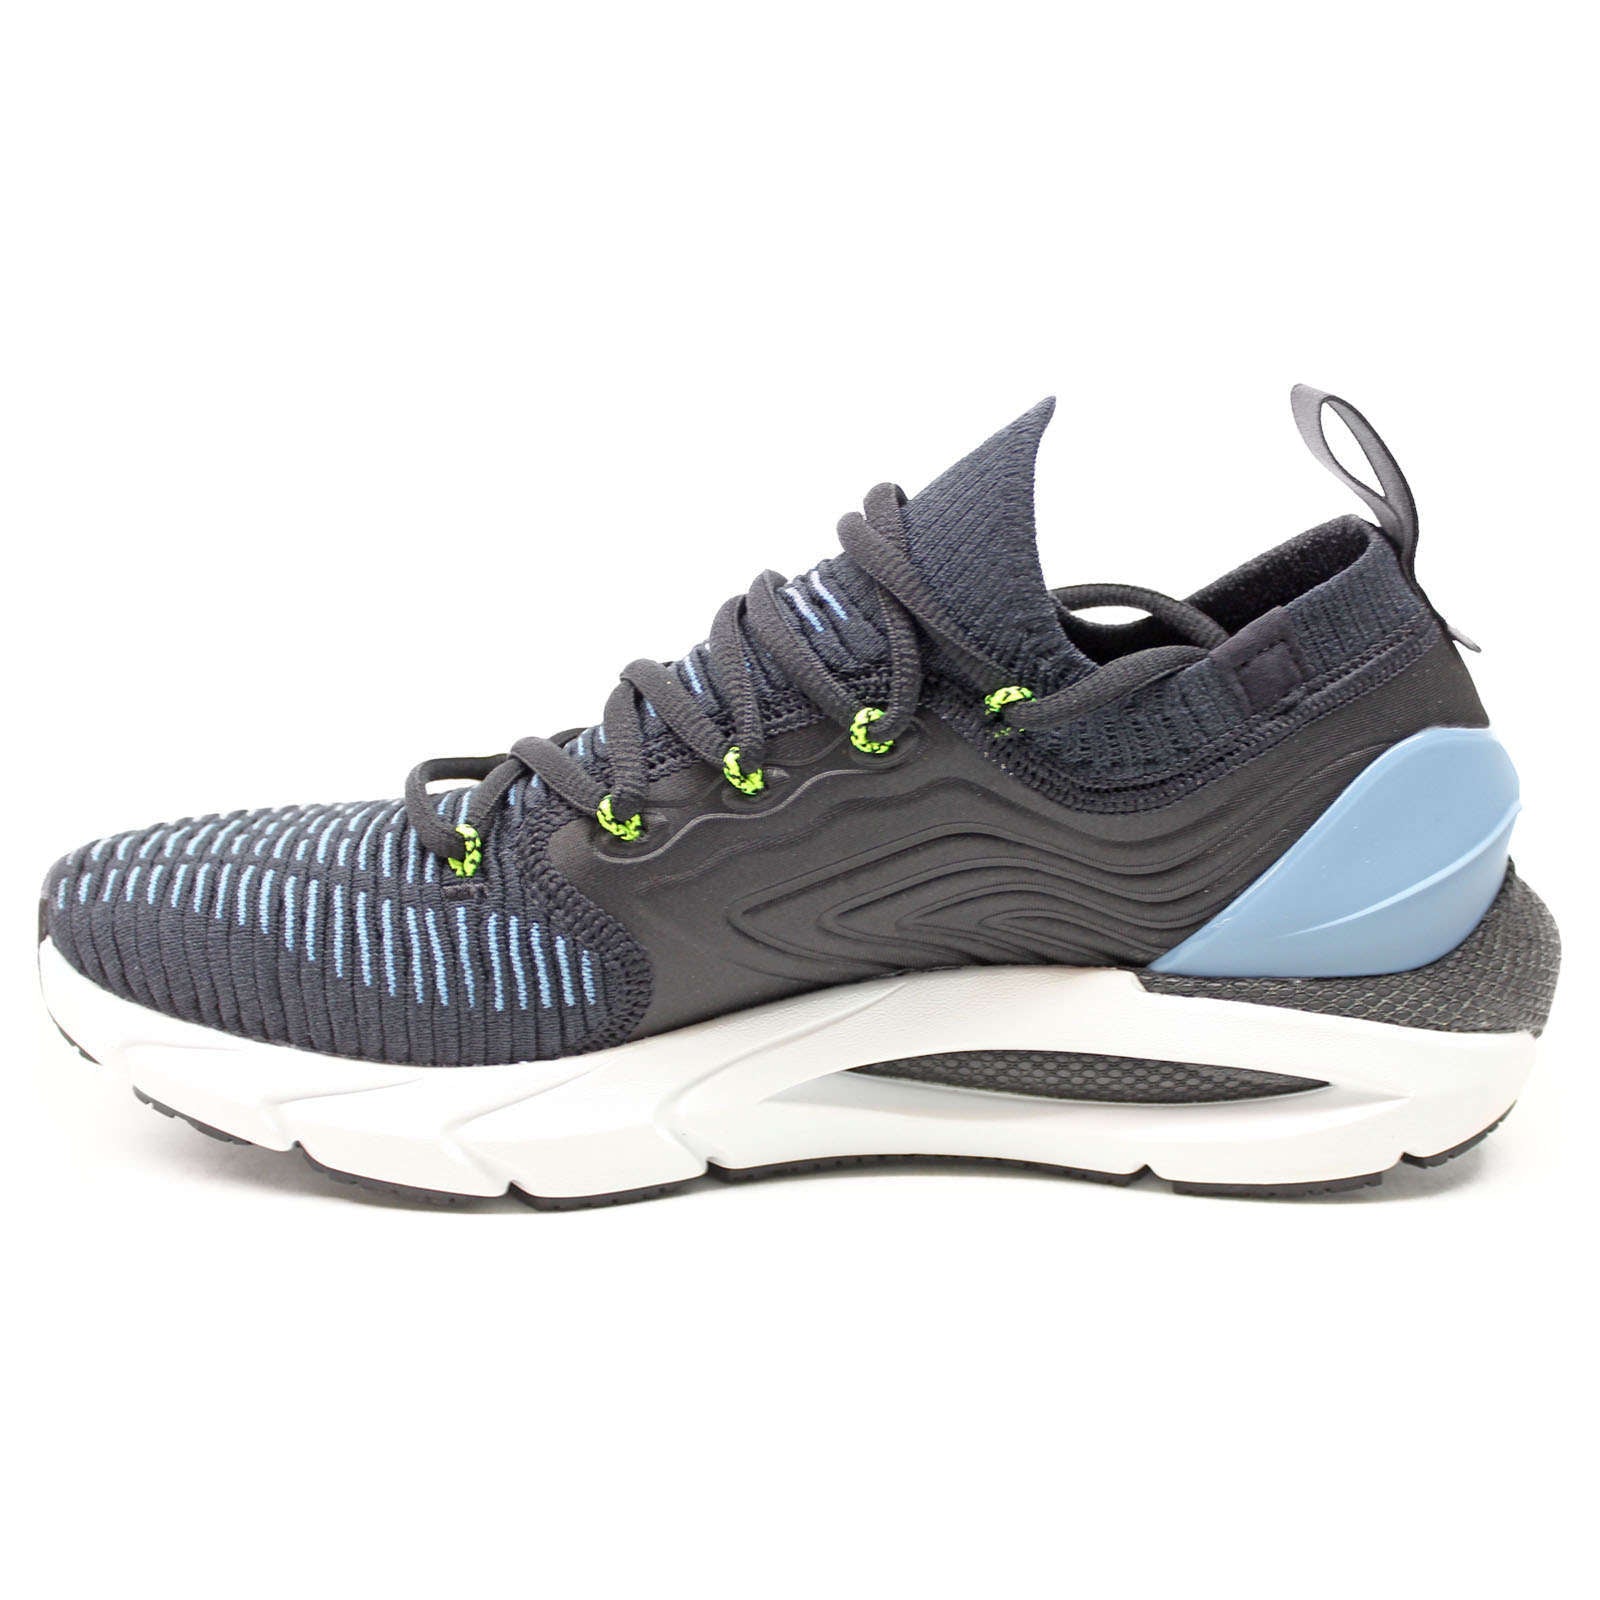 Under Armour HOVR Phantom 2 INKNT Synthetic Textile Men's Low-Top Trainers#color_black black blue